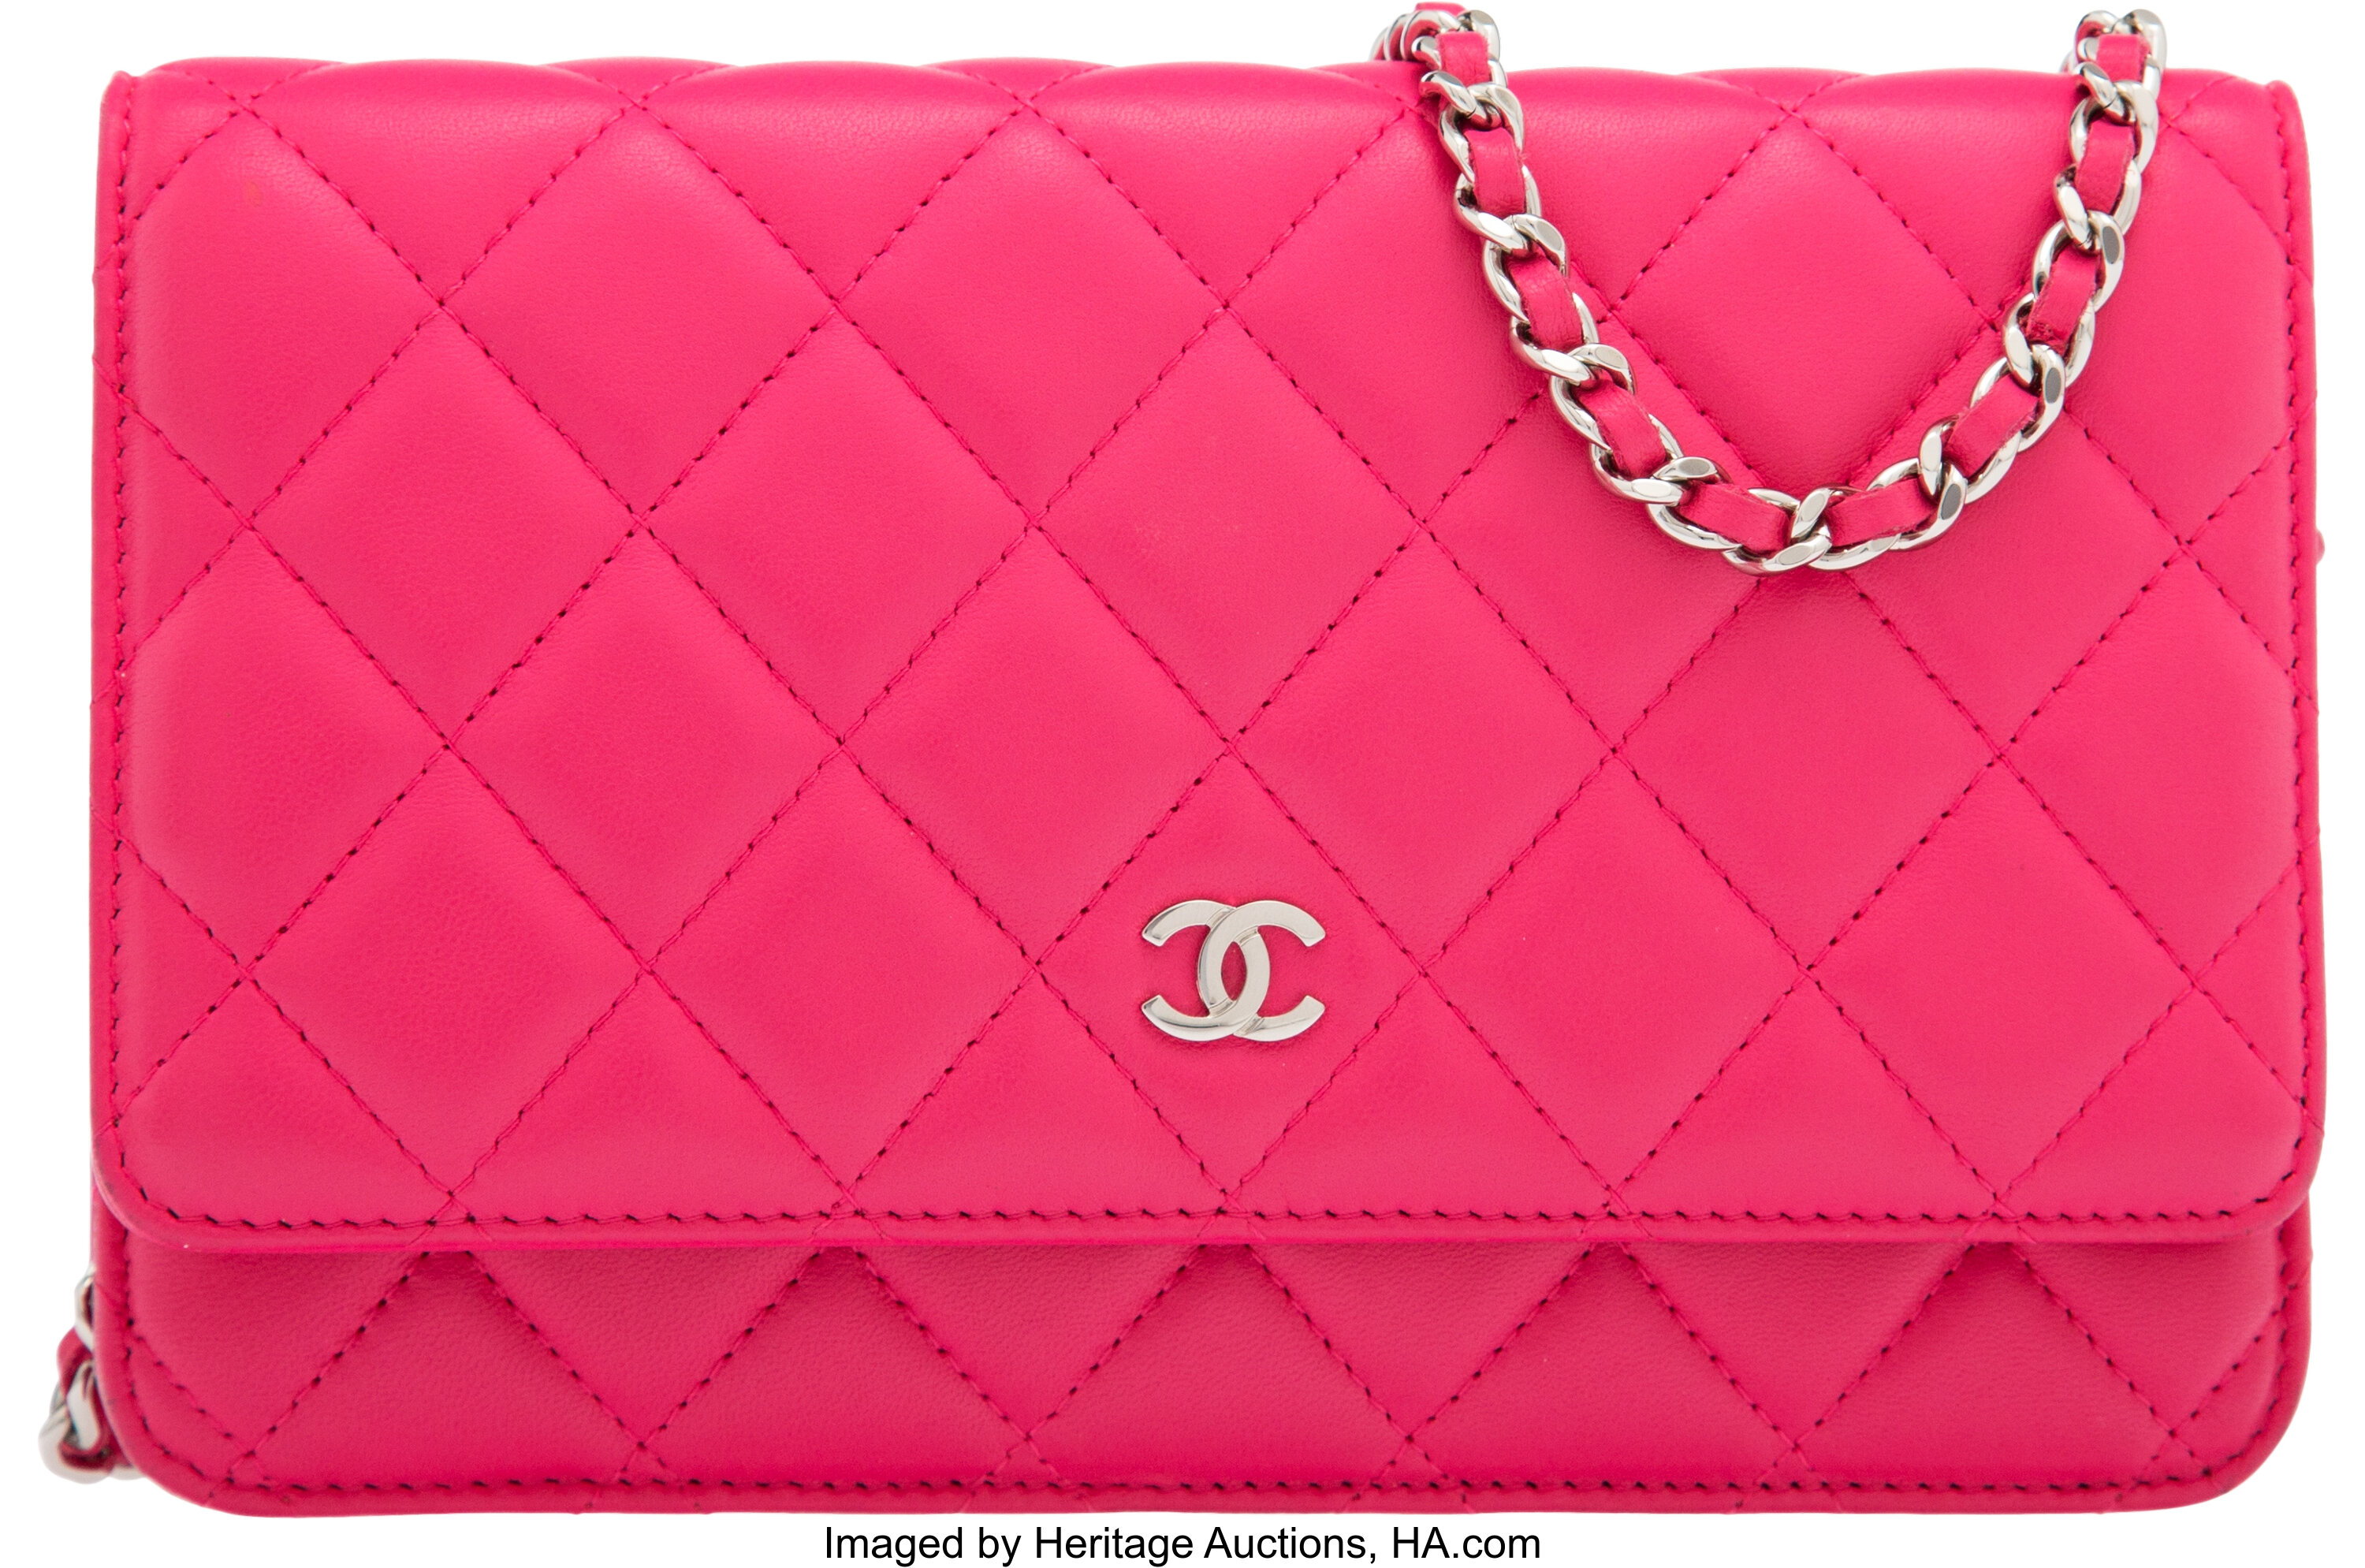 Chanel Hot Pink Quilted Trendy Wallet On Chain Bag in Lambskin Leather with Champagne Gold Hardware